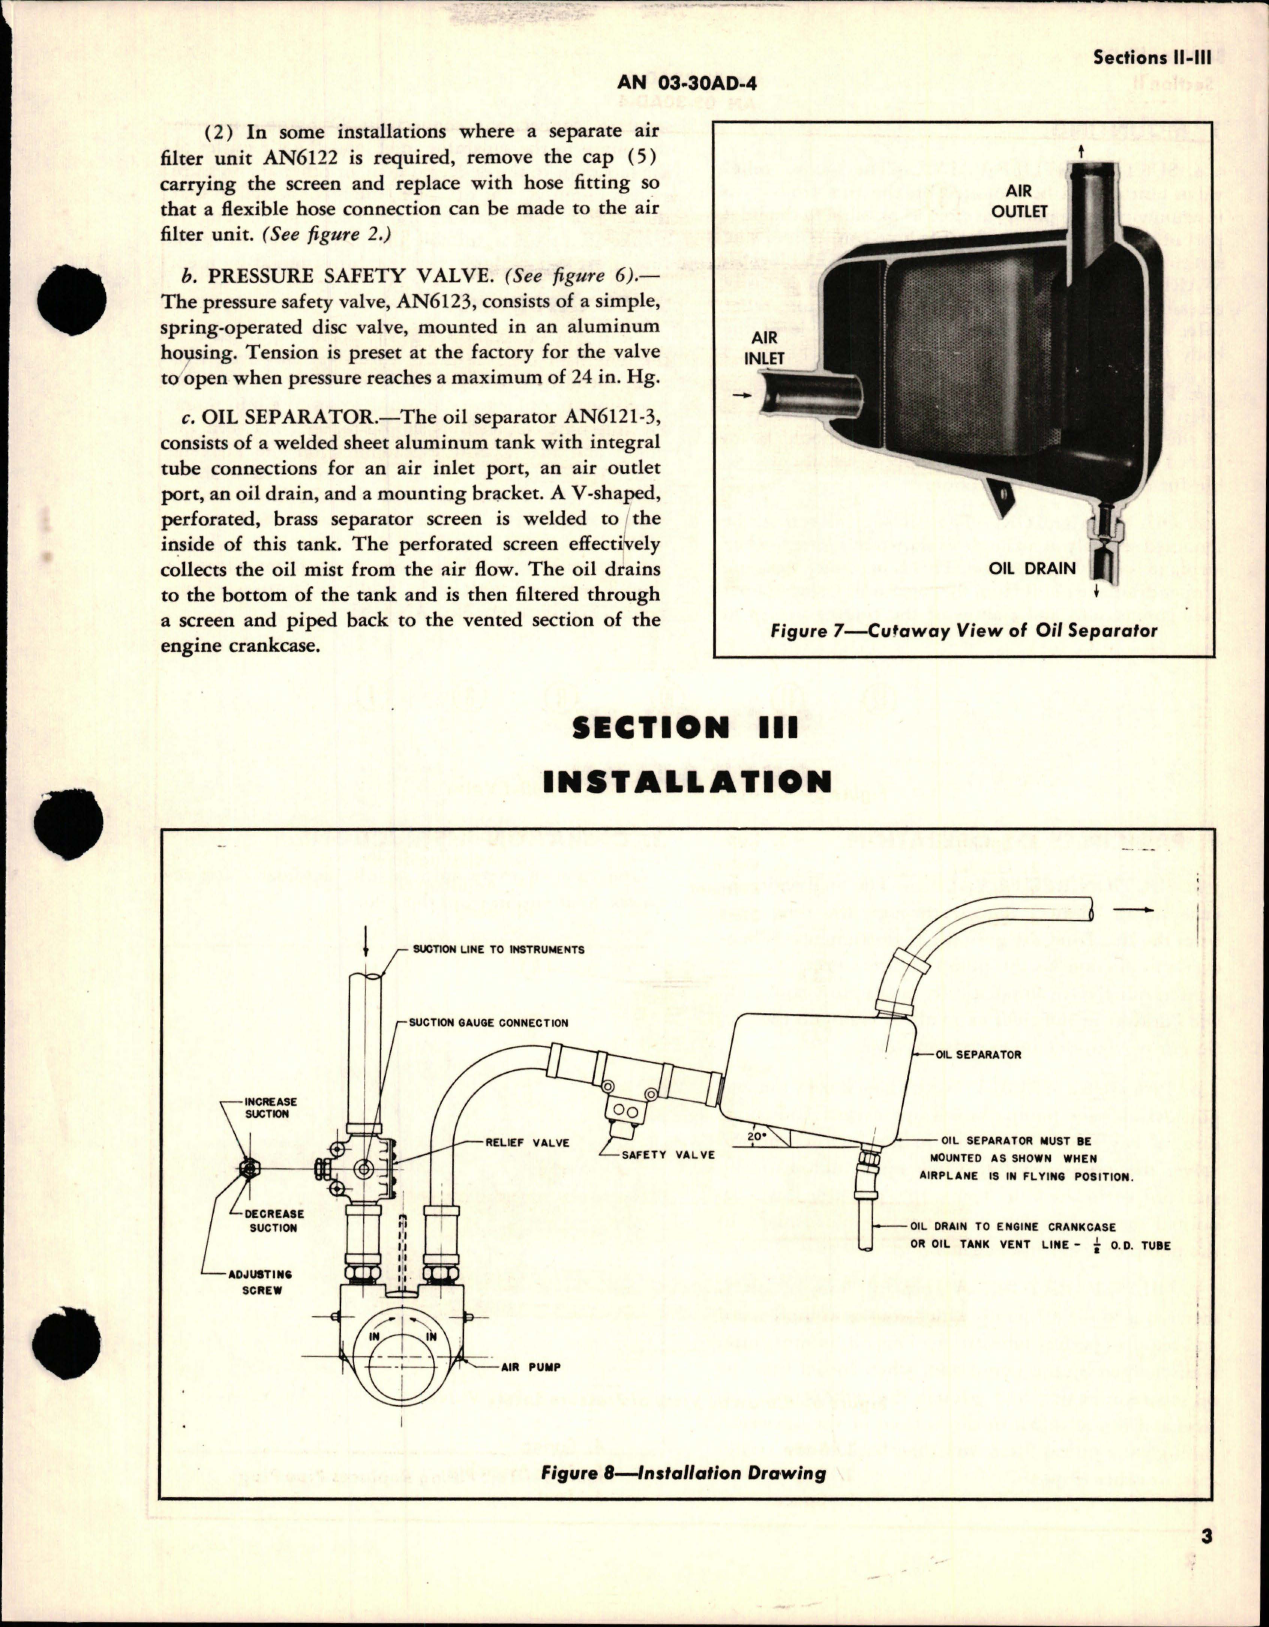 Sample page 7 from AirCorps Library document: Operation, Service and Overhaul Instructions with Parts Catalog for Relief Valves, Safety Valve Oil Separator 